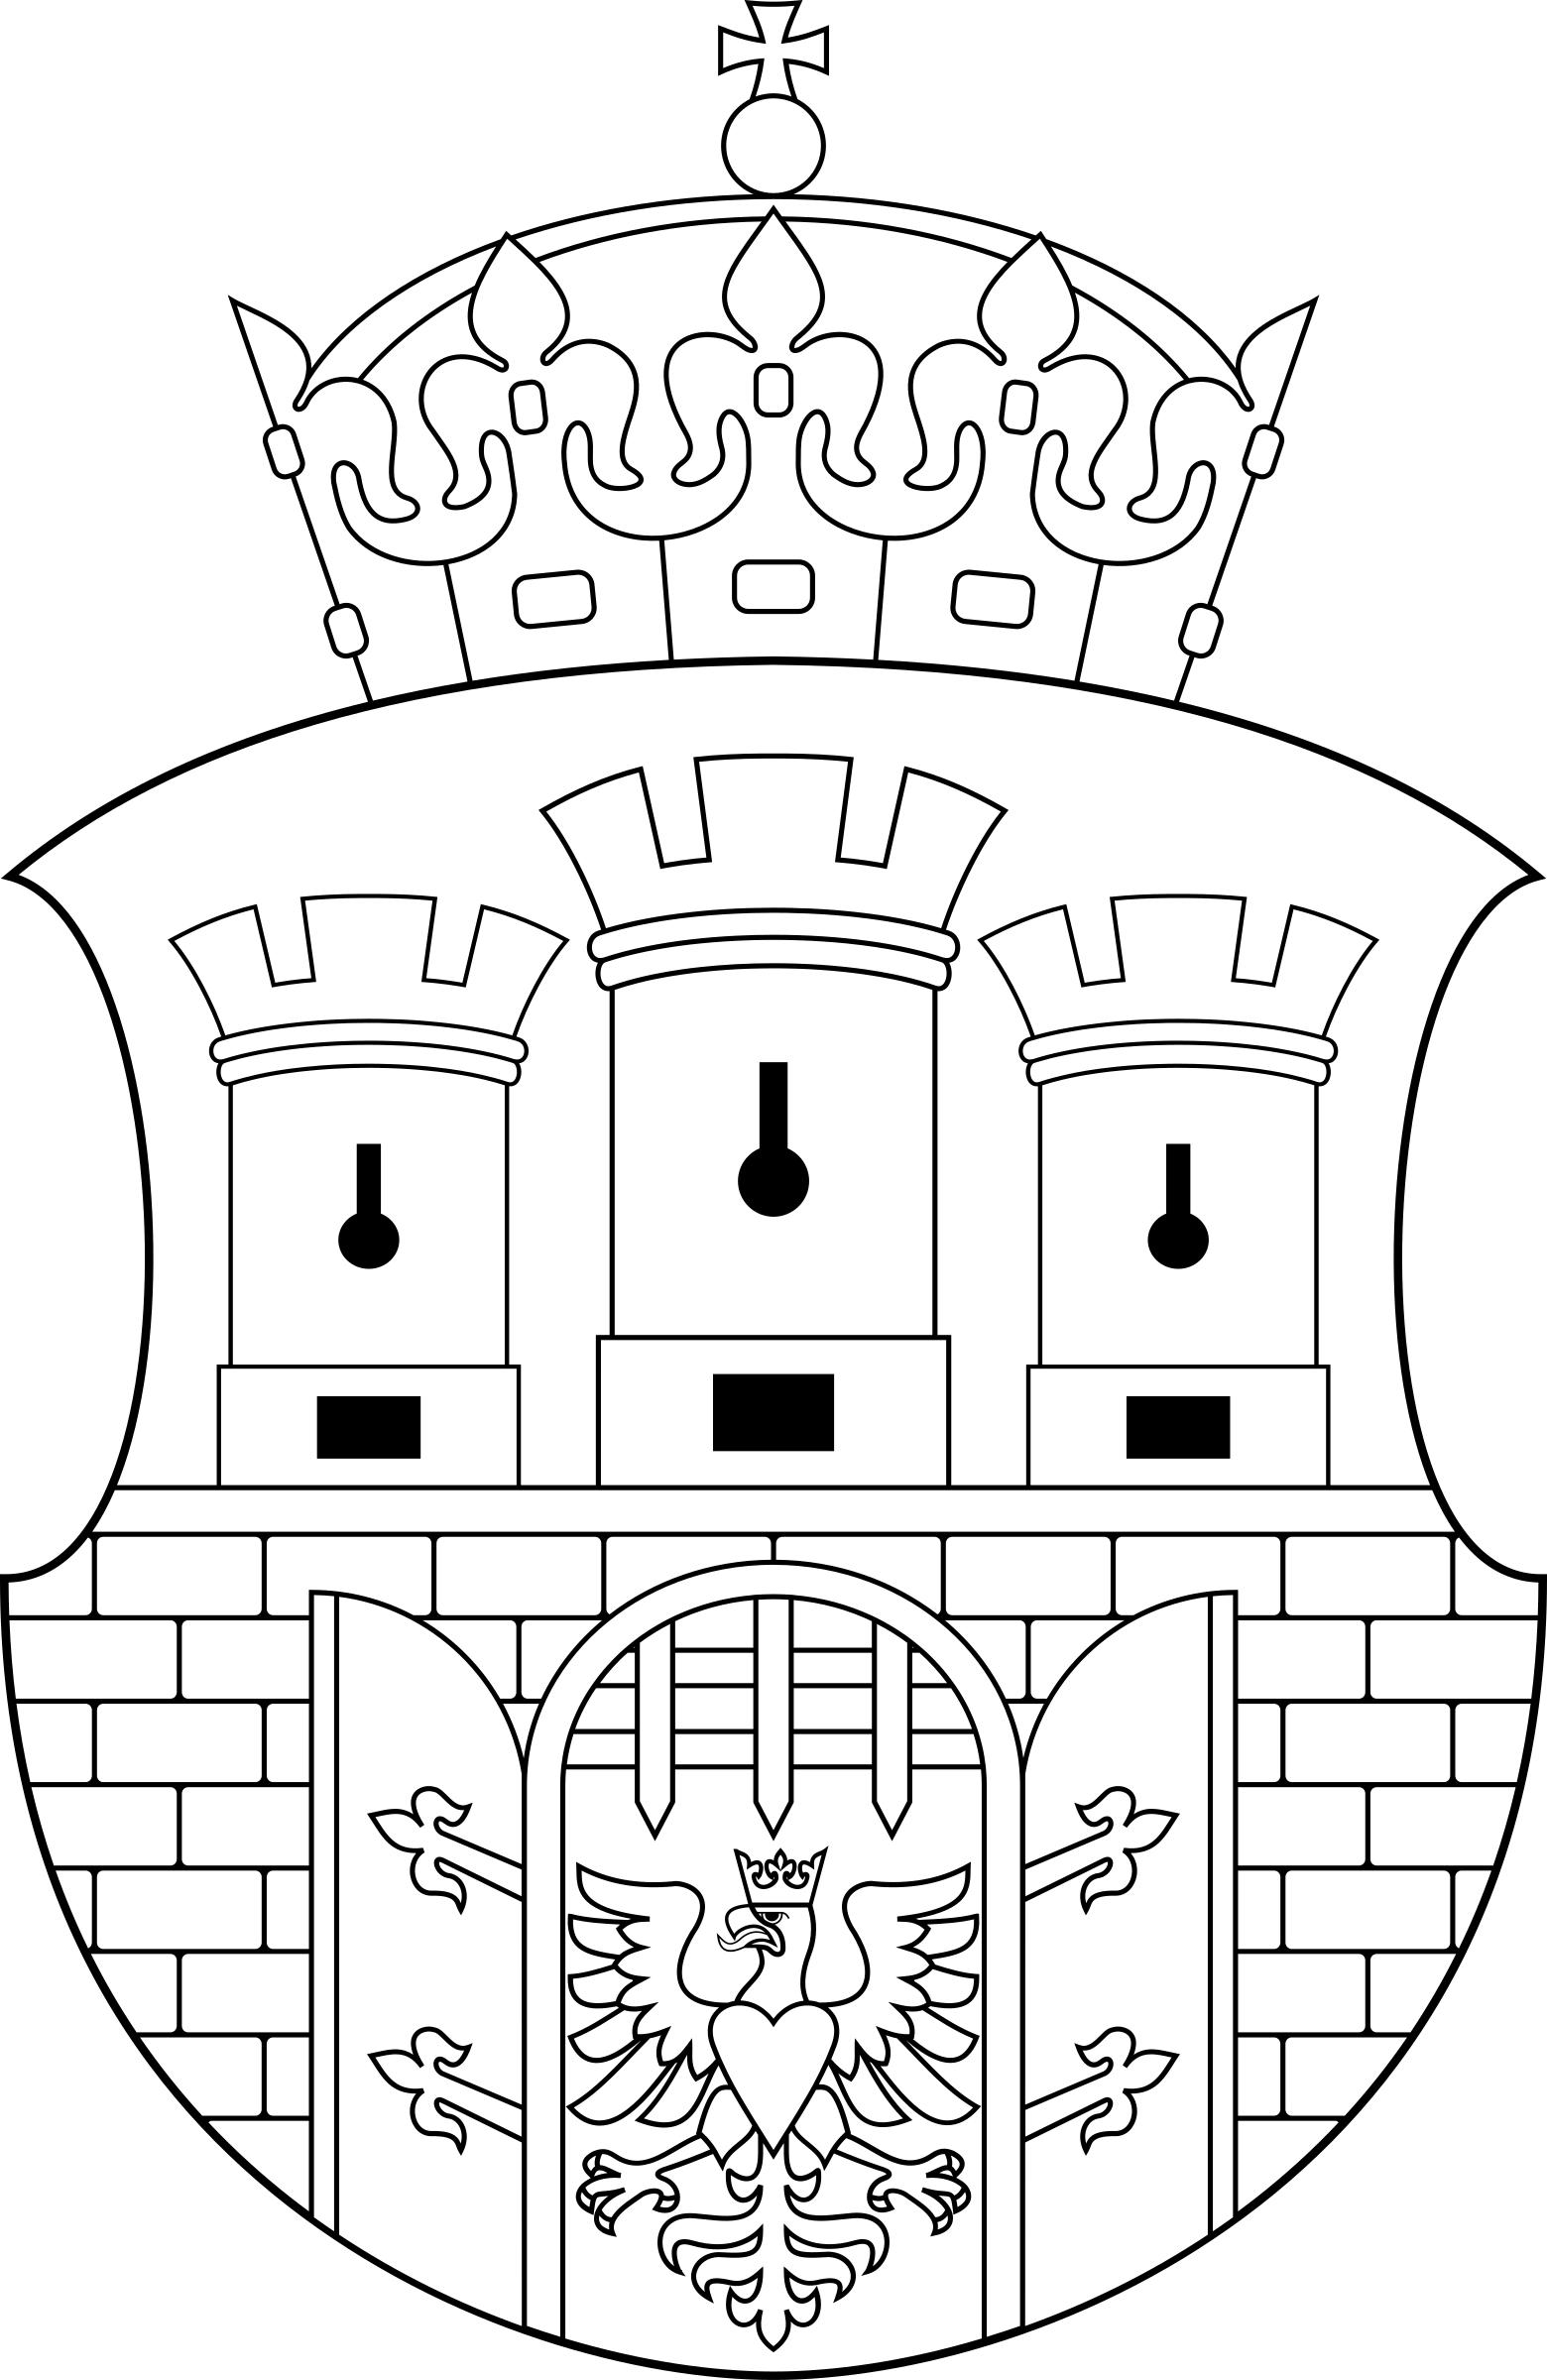 Coat of Arms of Cracow - lineart png